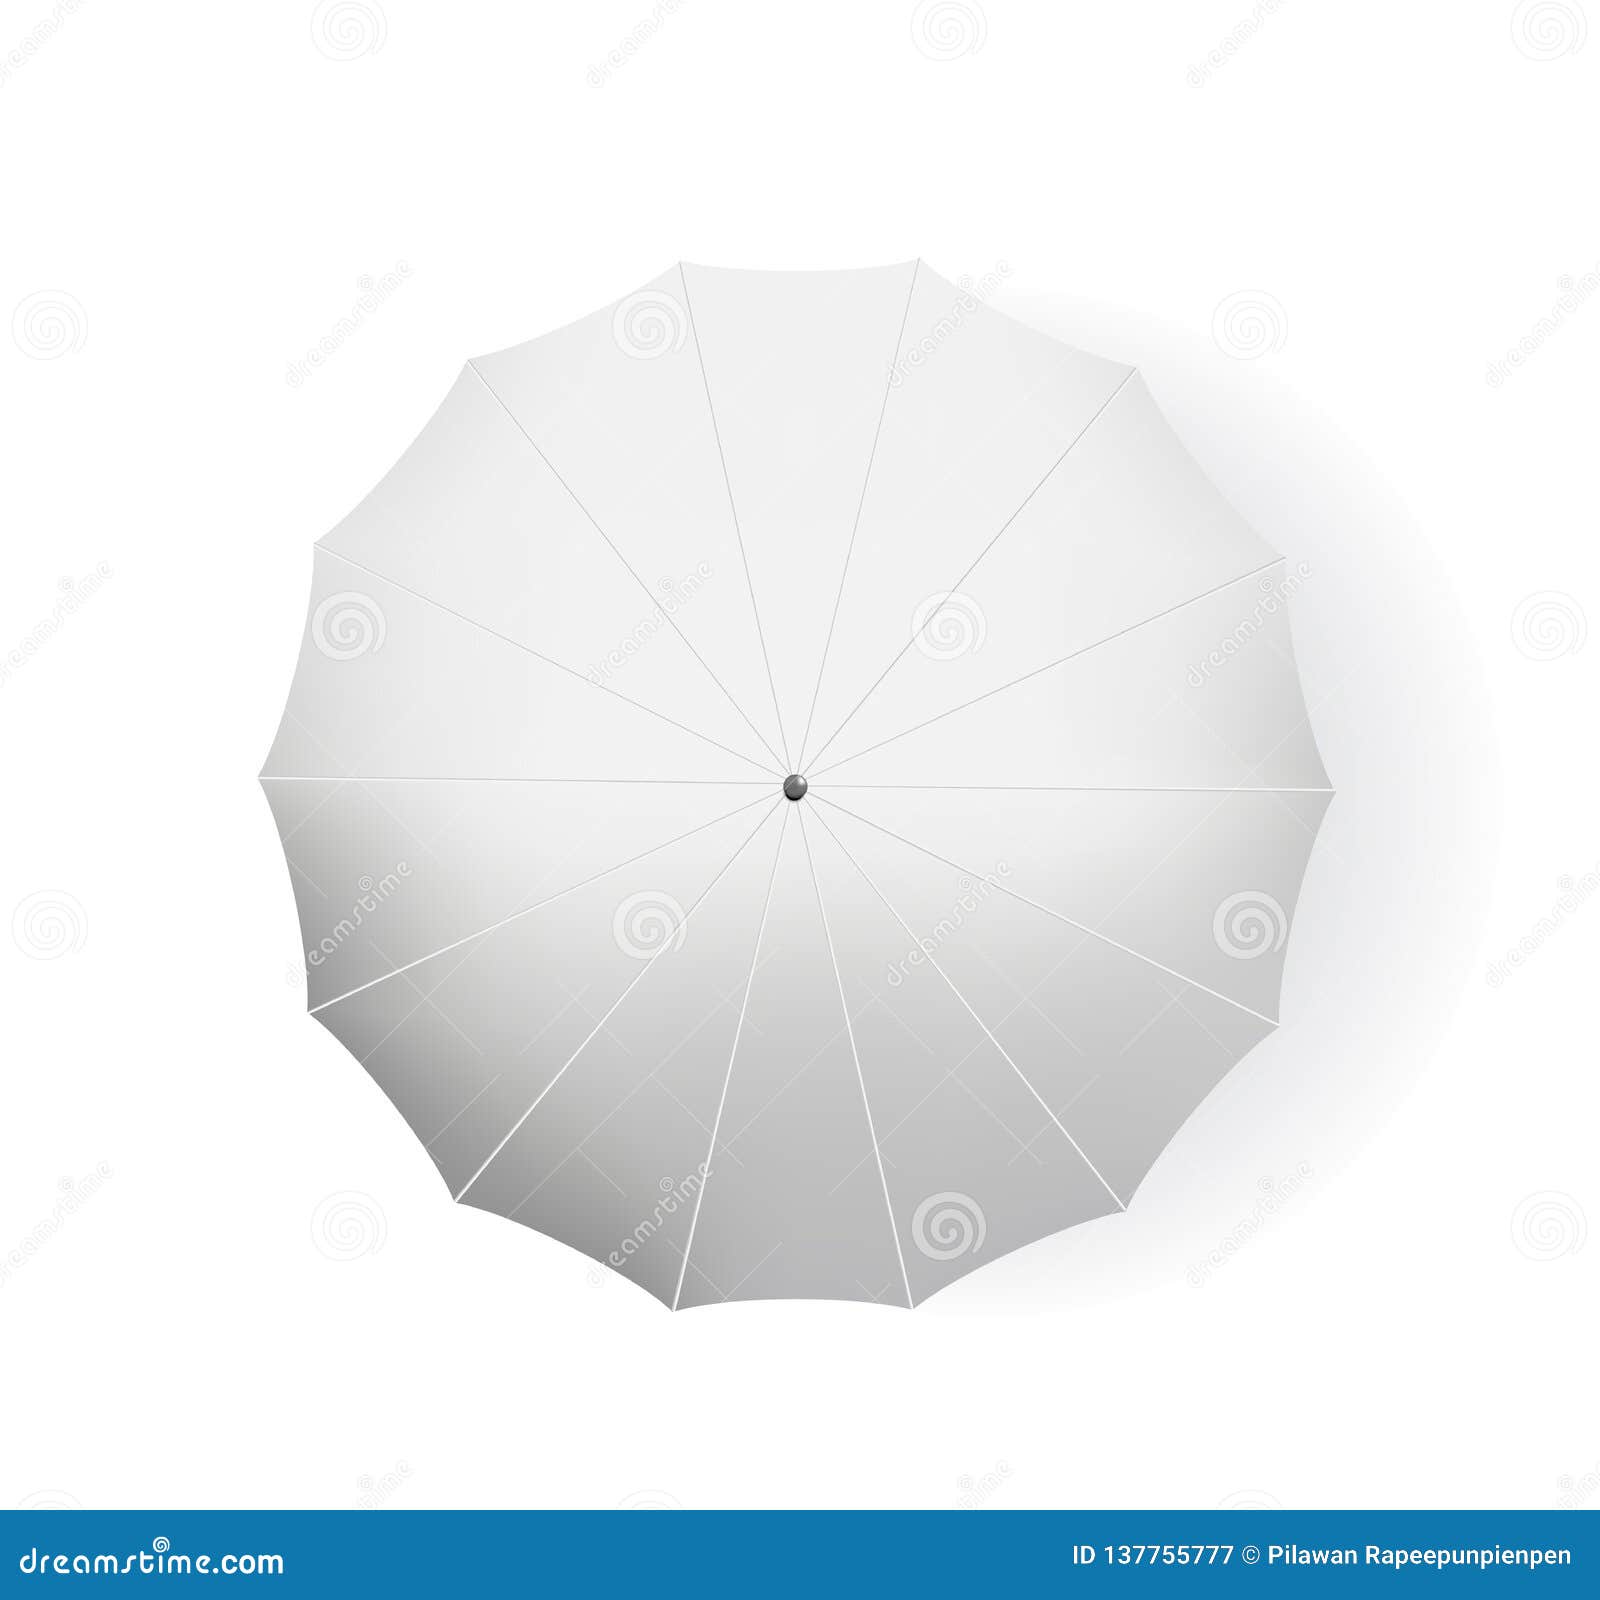 Download 3D Mock Up Realistic White Umbrella Top View Background ...